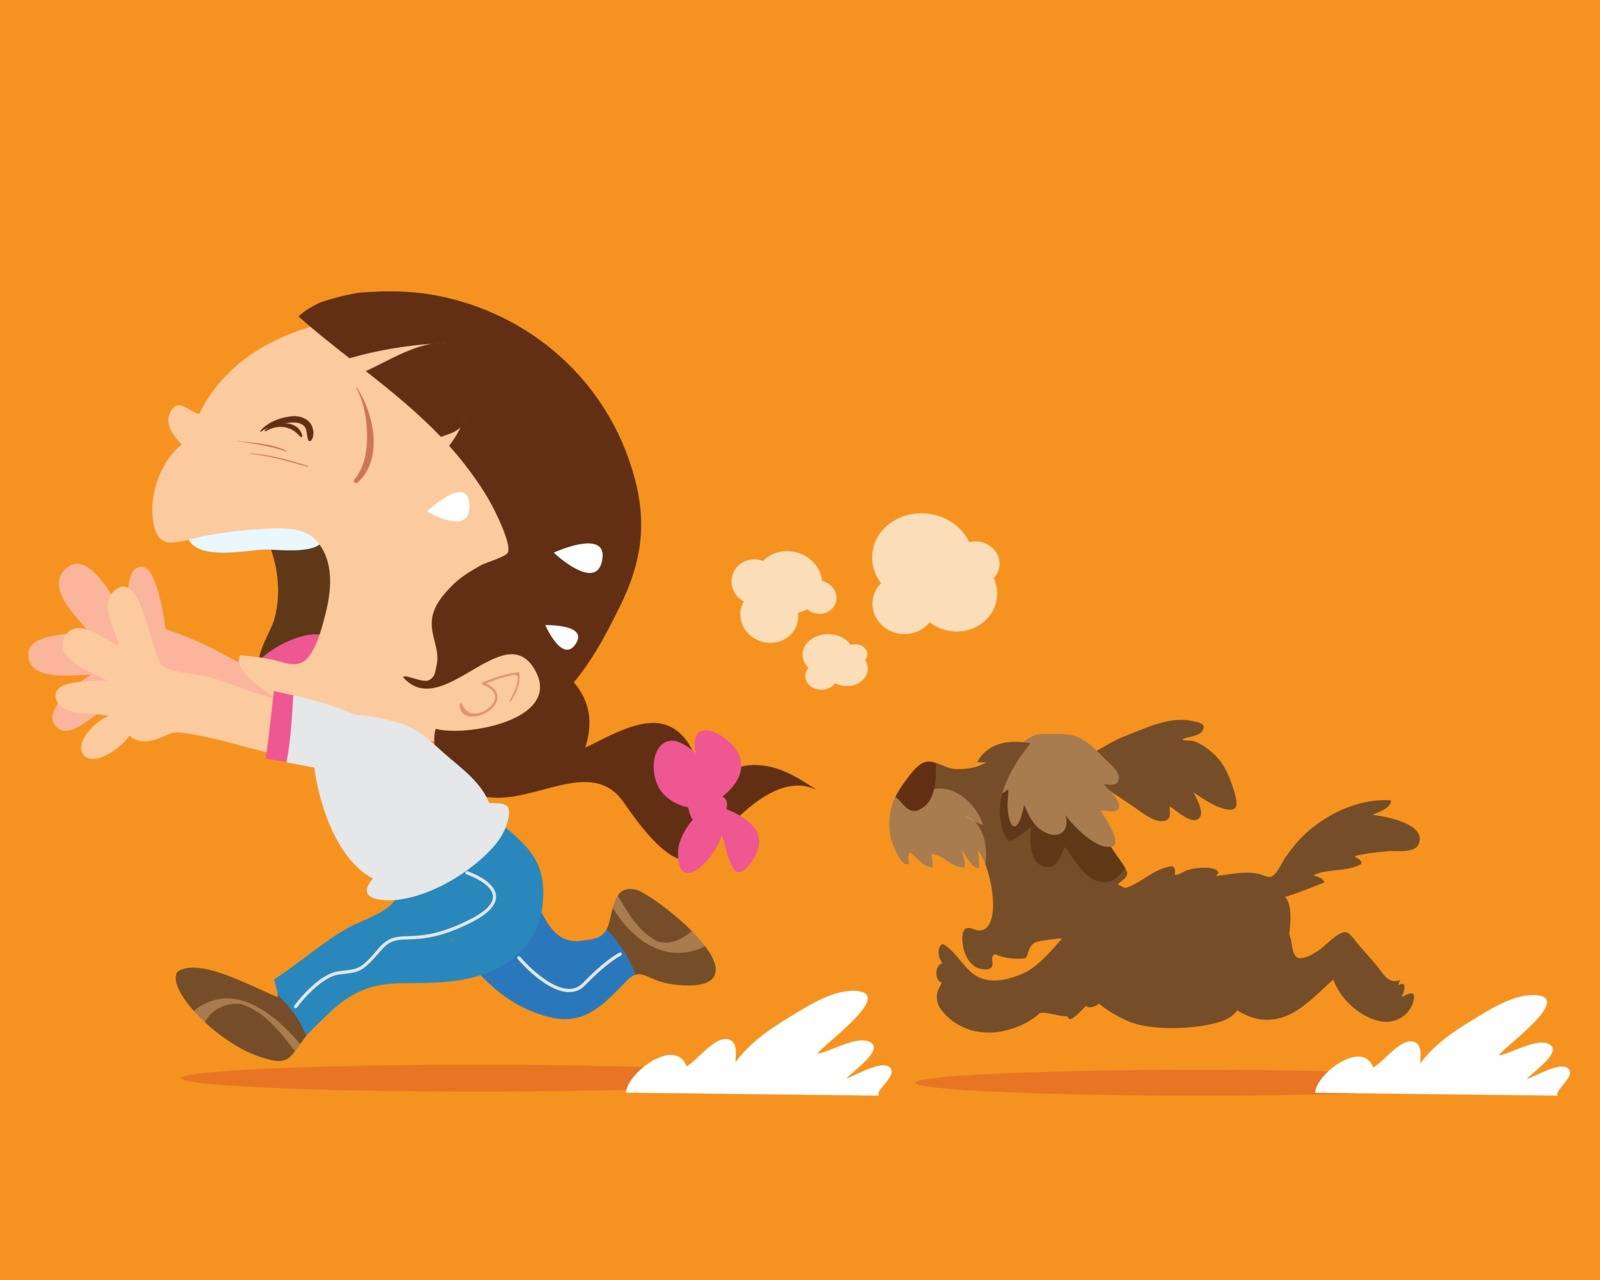 cute girl running away from angry dog by niwat_s@hotmail.com